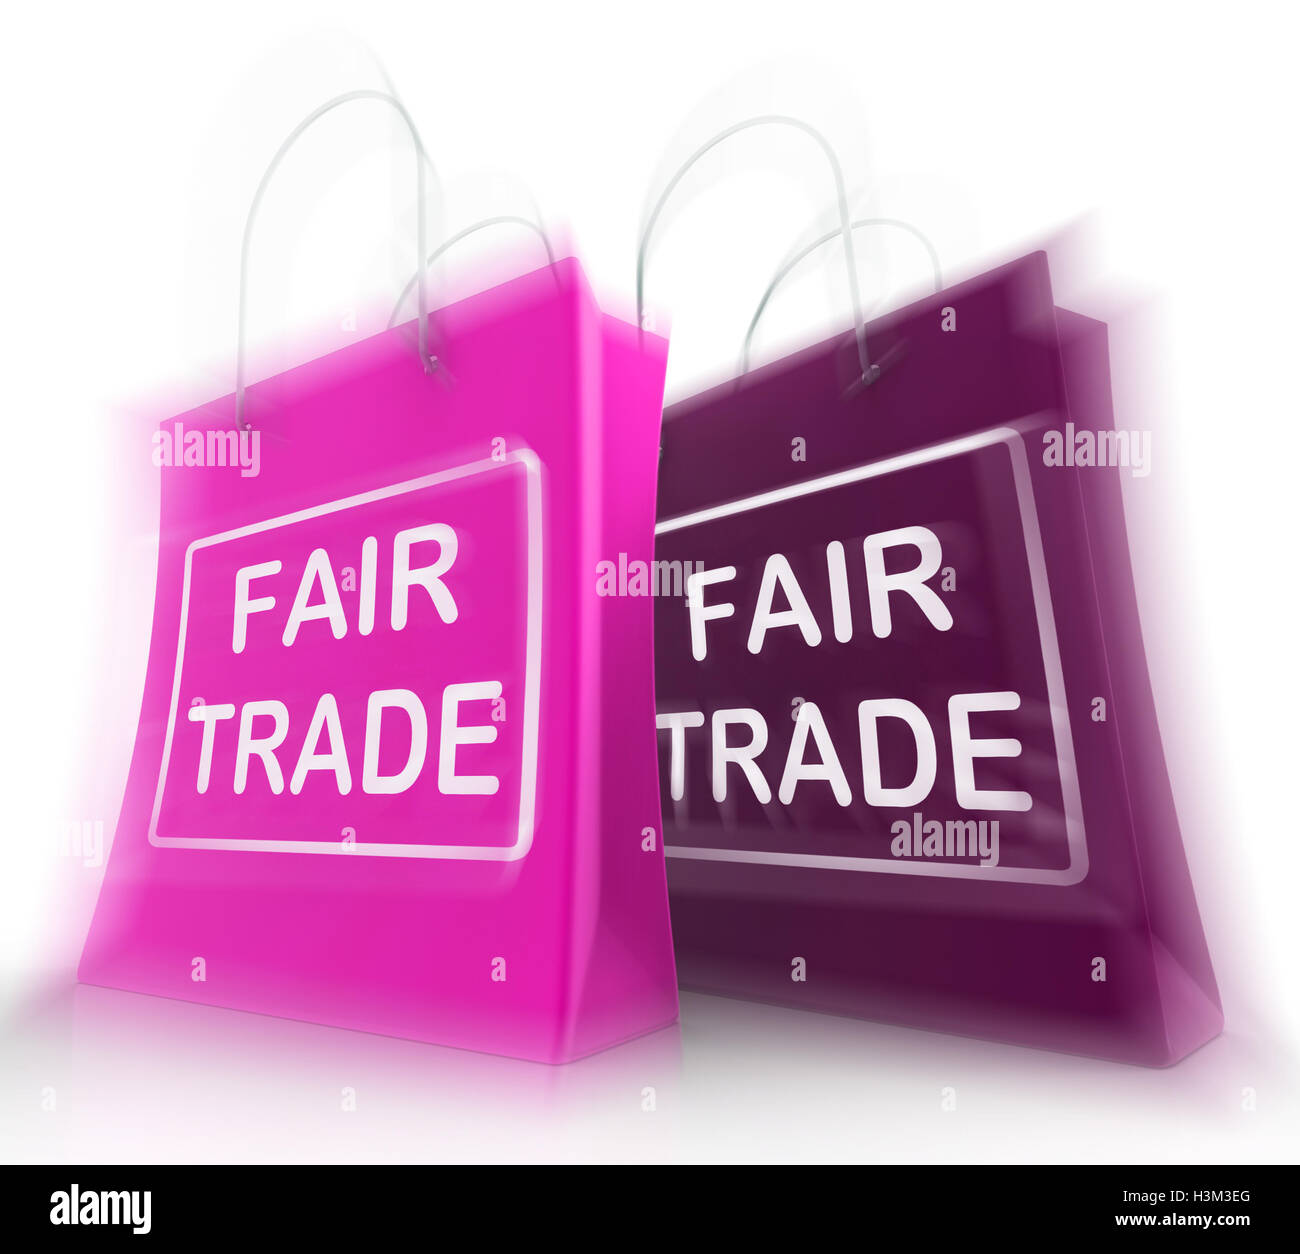 Fair Trade Shopping Bag Represents Equal Deals and Exchange Stock Photo